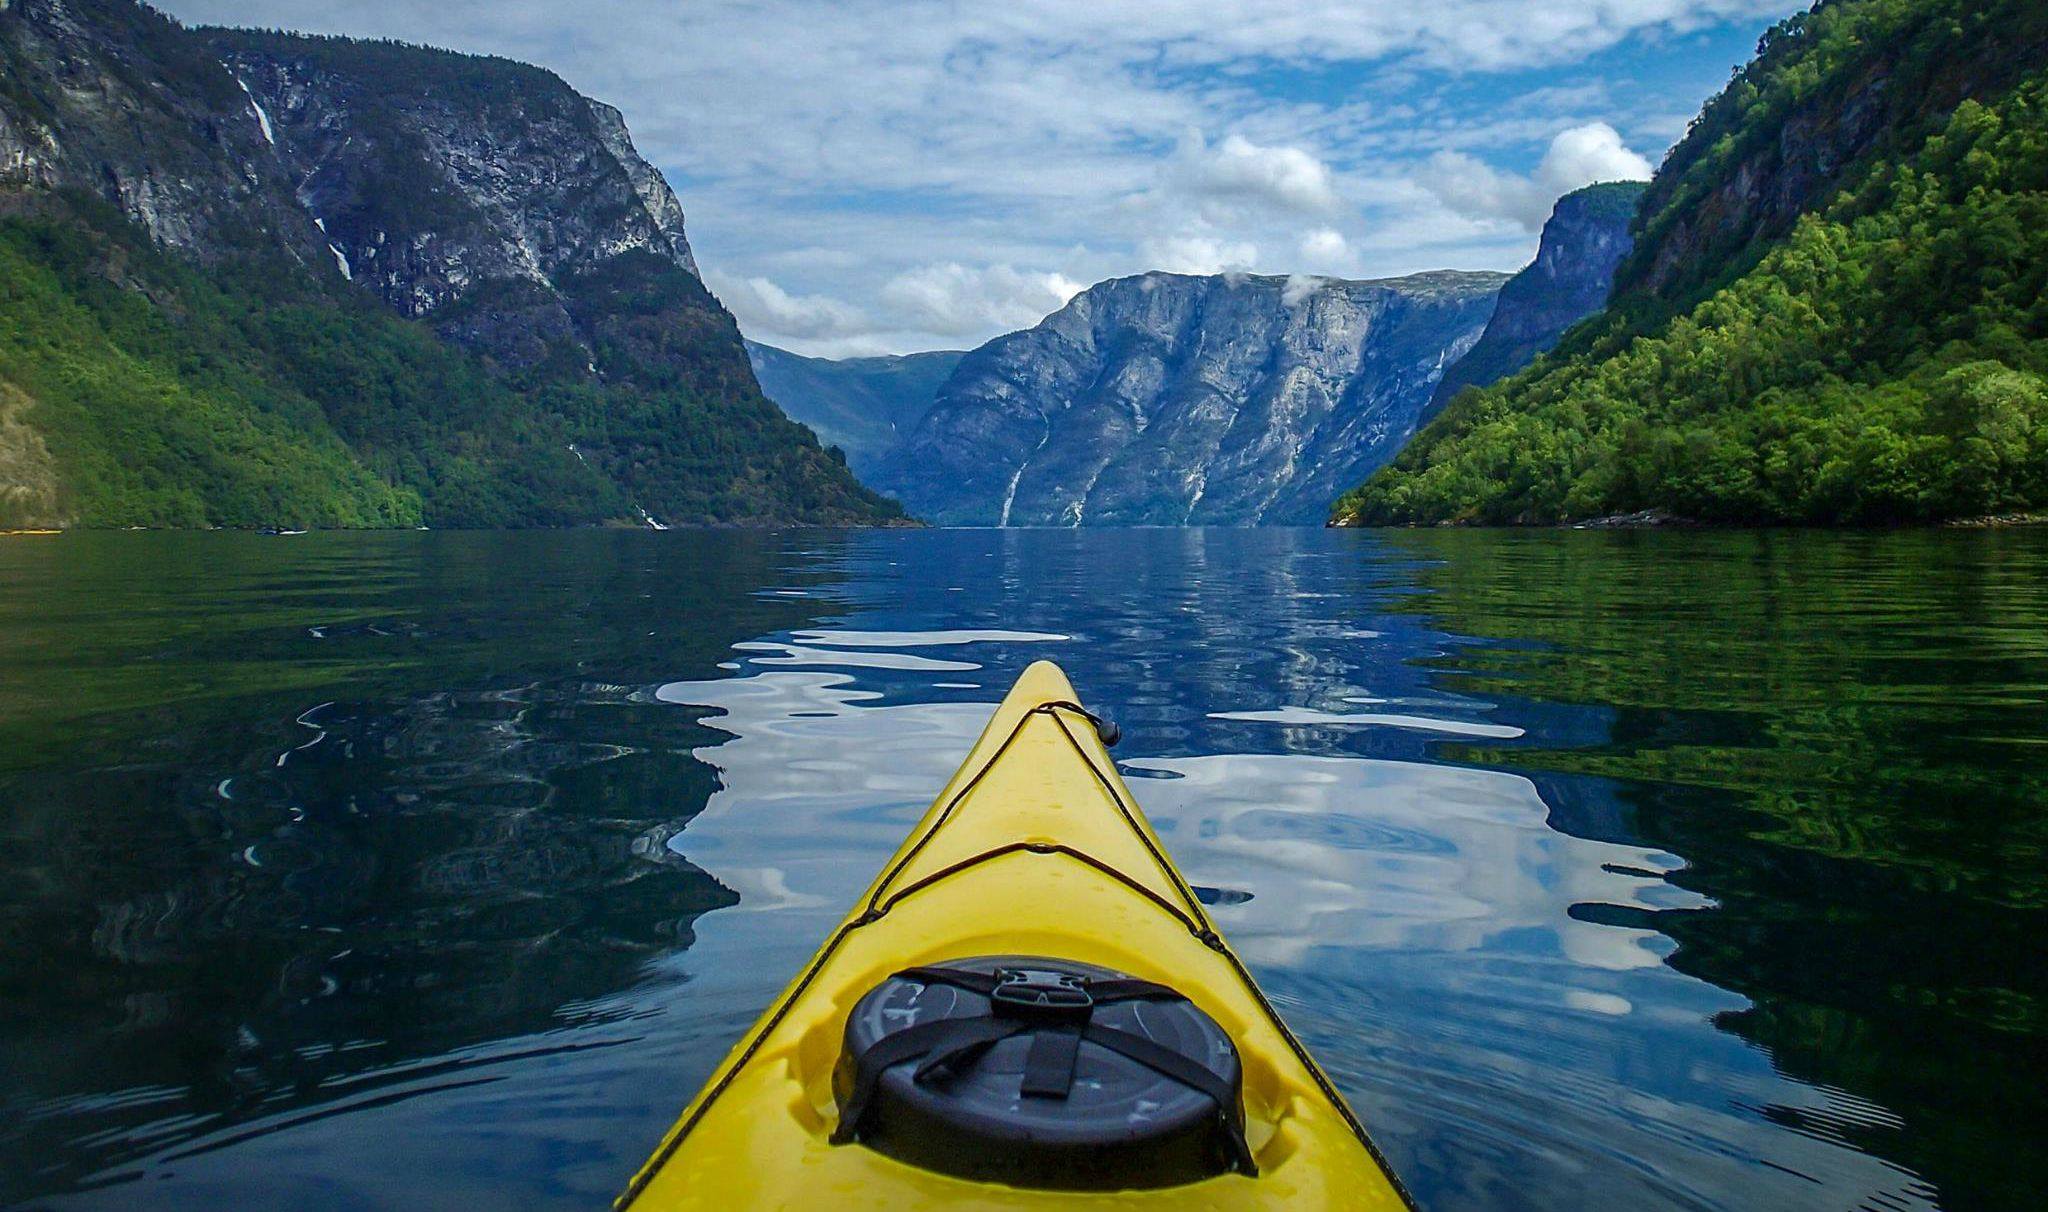 The front of a kayak as someone paddles down the Nærøyfjord, Norway